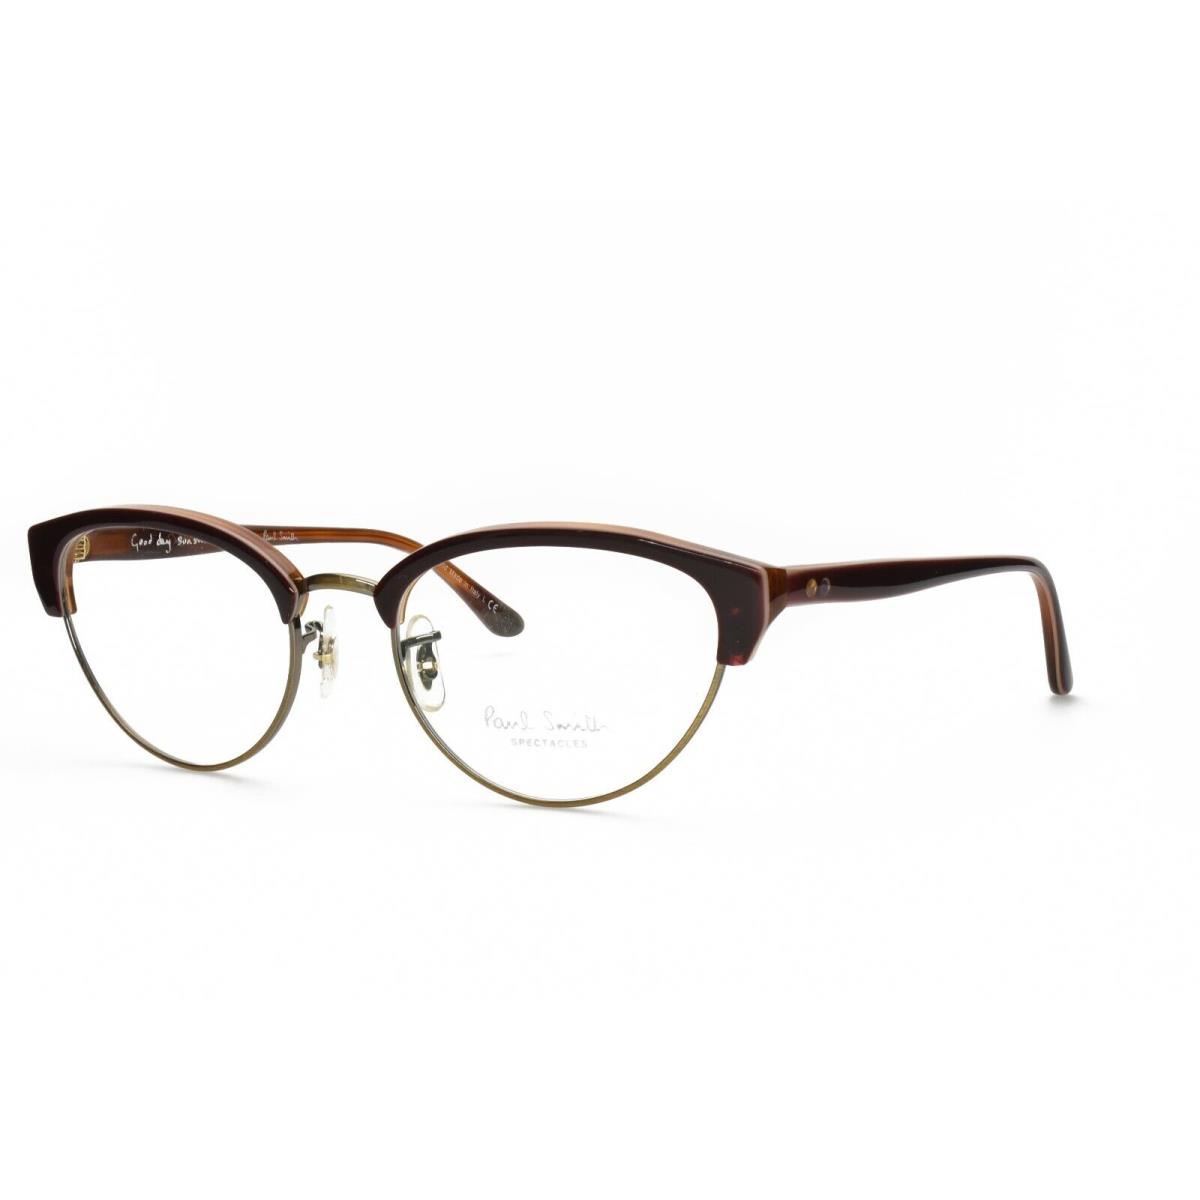 Paul Smith PS Harlyn 8195 1289 Eyeglasses Frames Only 50-18-140